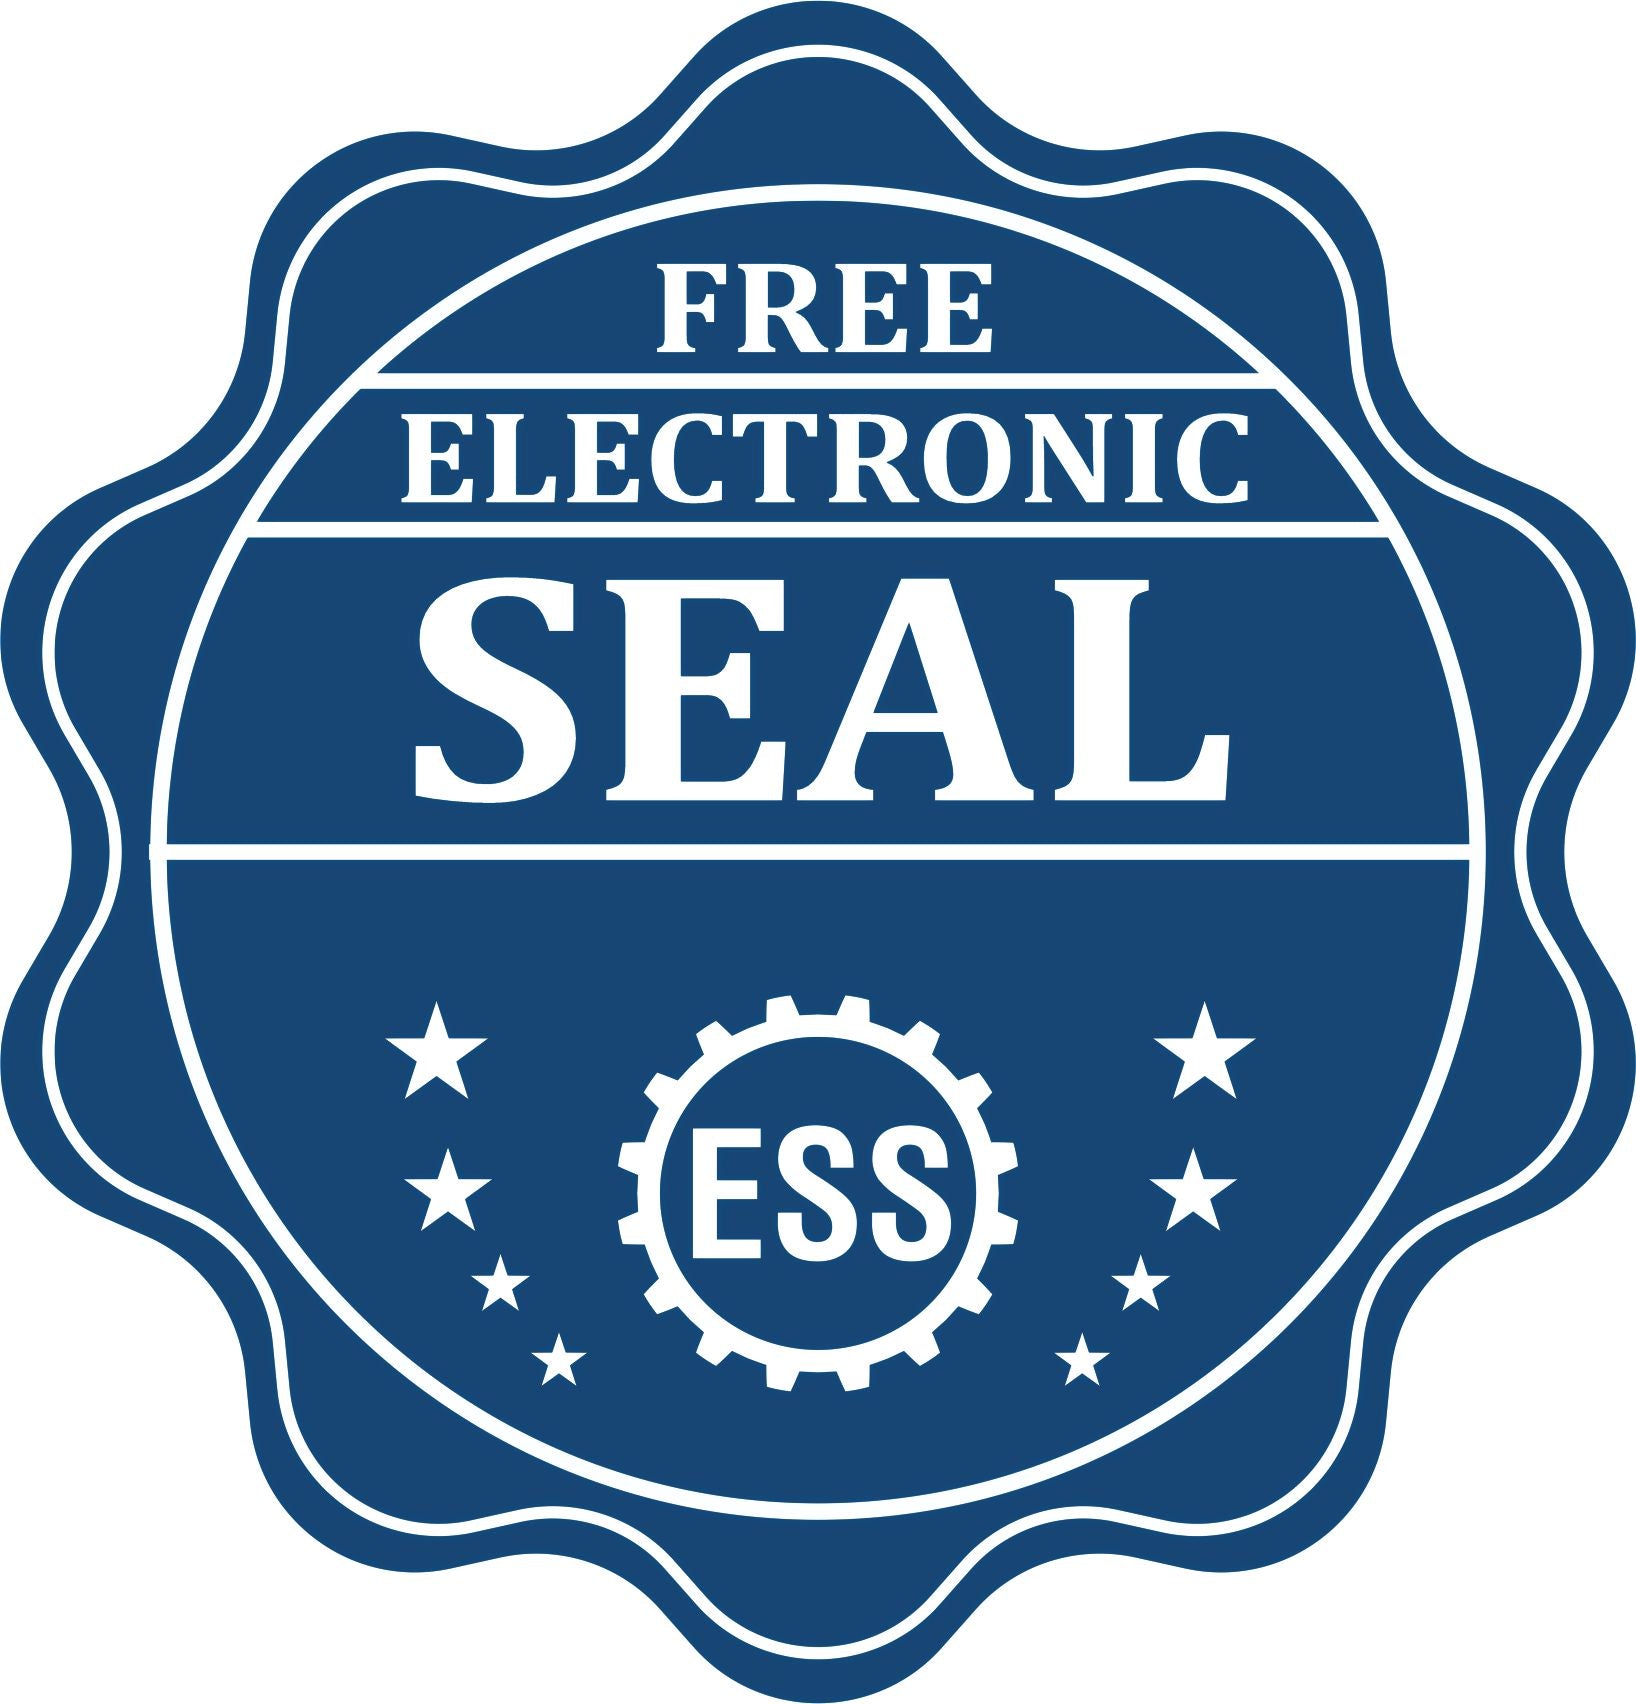 A badge showing a free electronic seal for the Gift Pennsylvania Engineer Seal with stars and the ESS gear on the emblem.